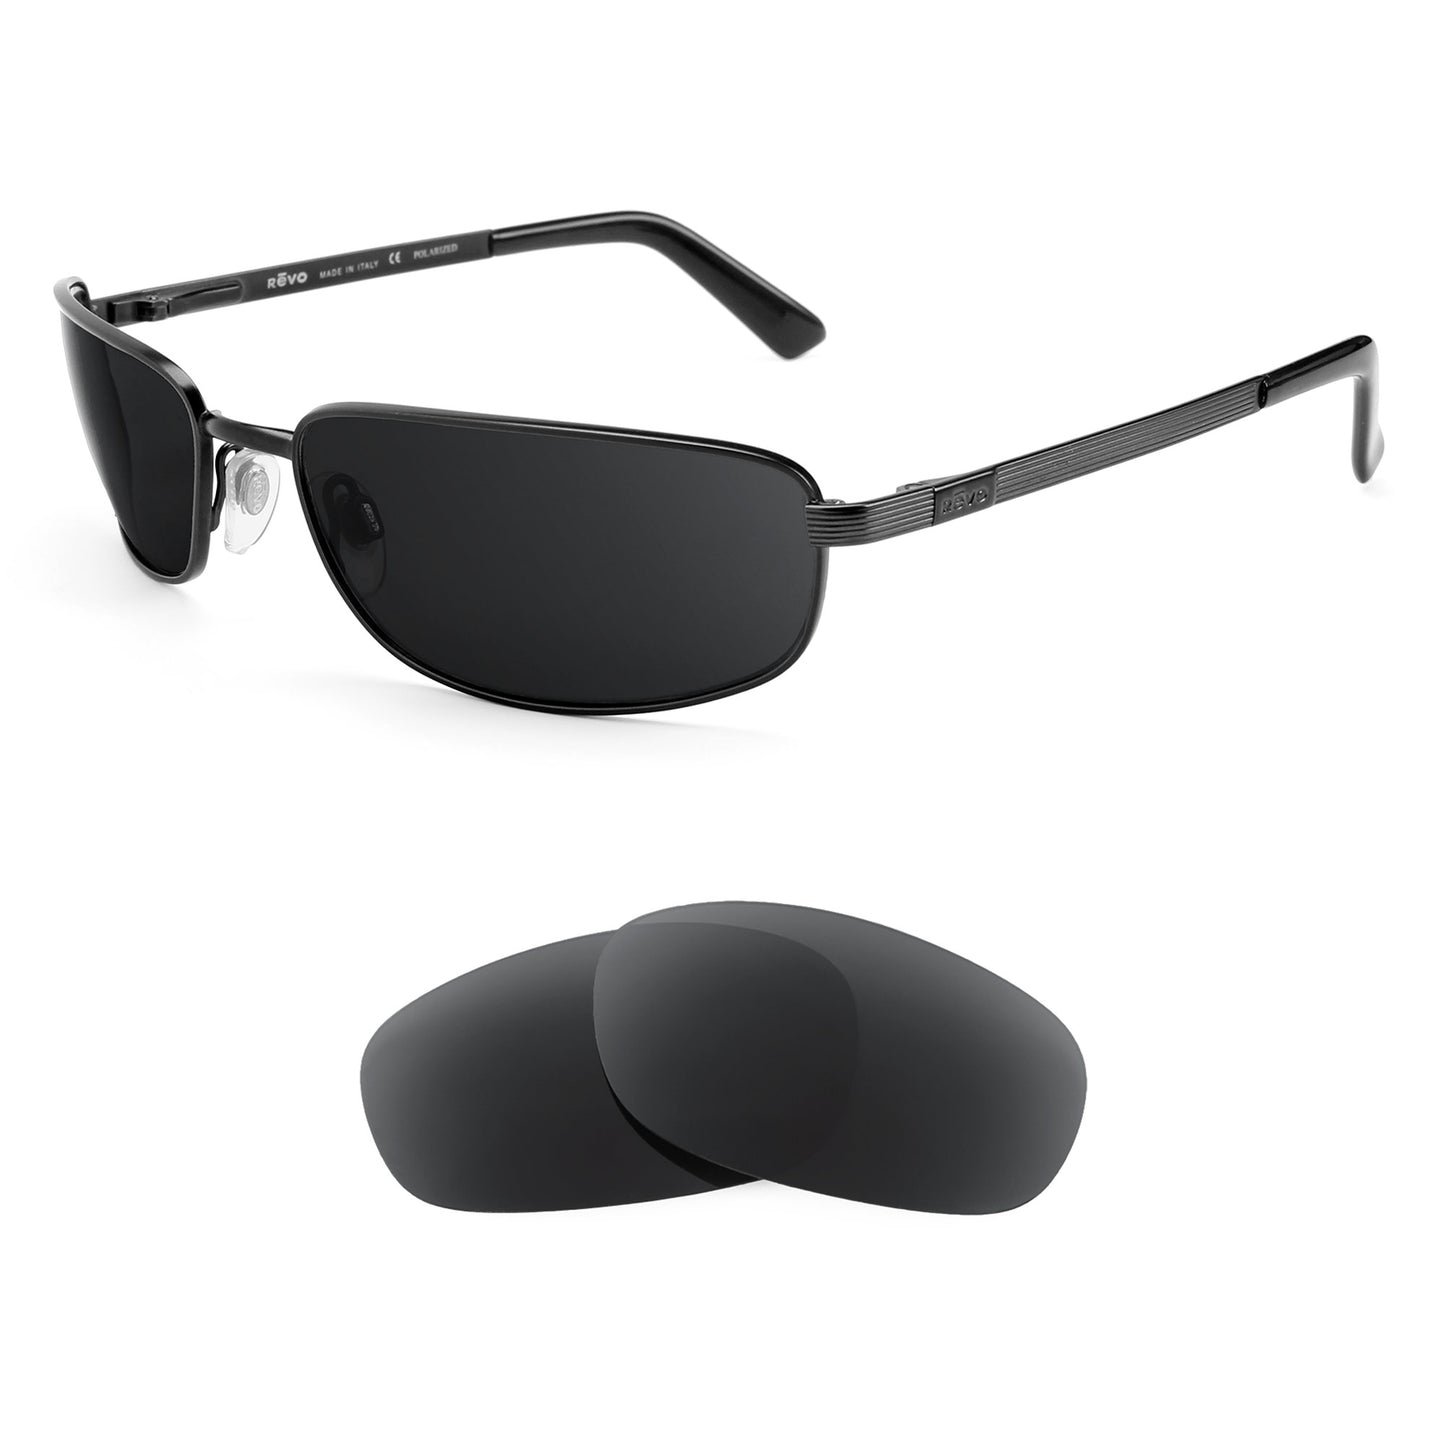 Revo 3010 sunglasses with replacement lenses